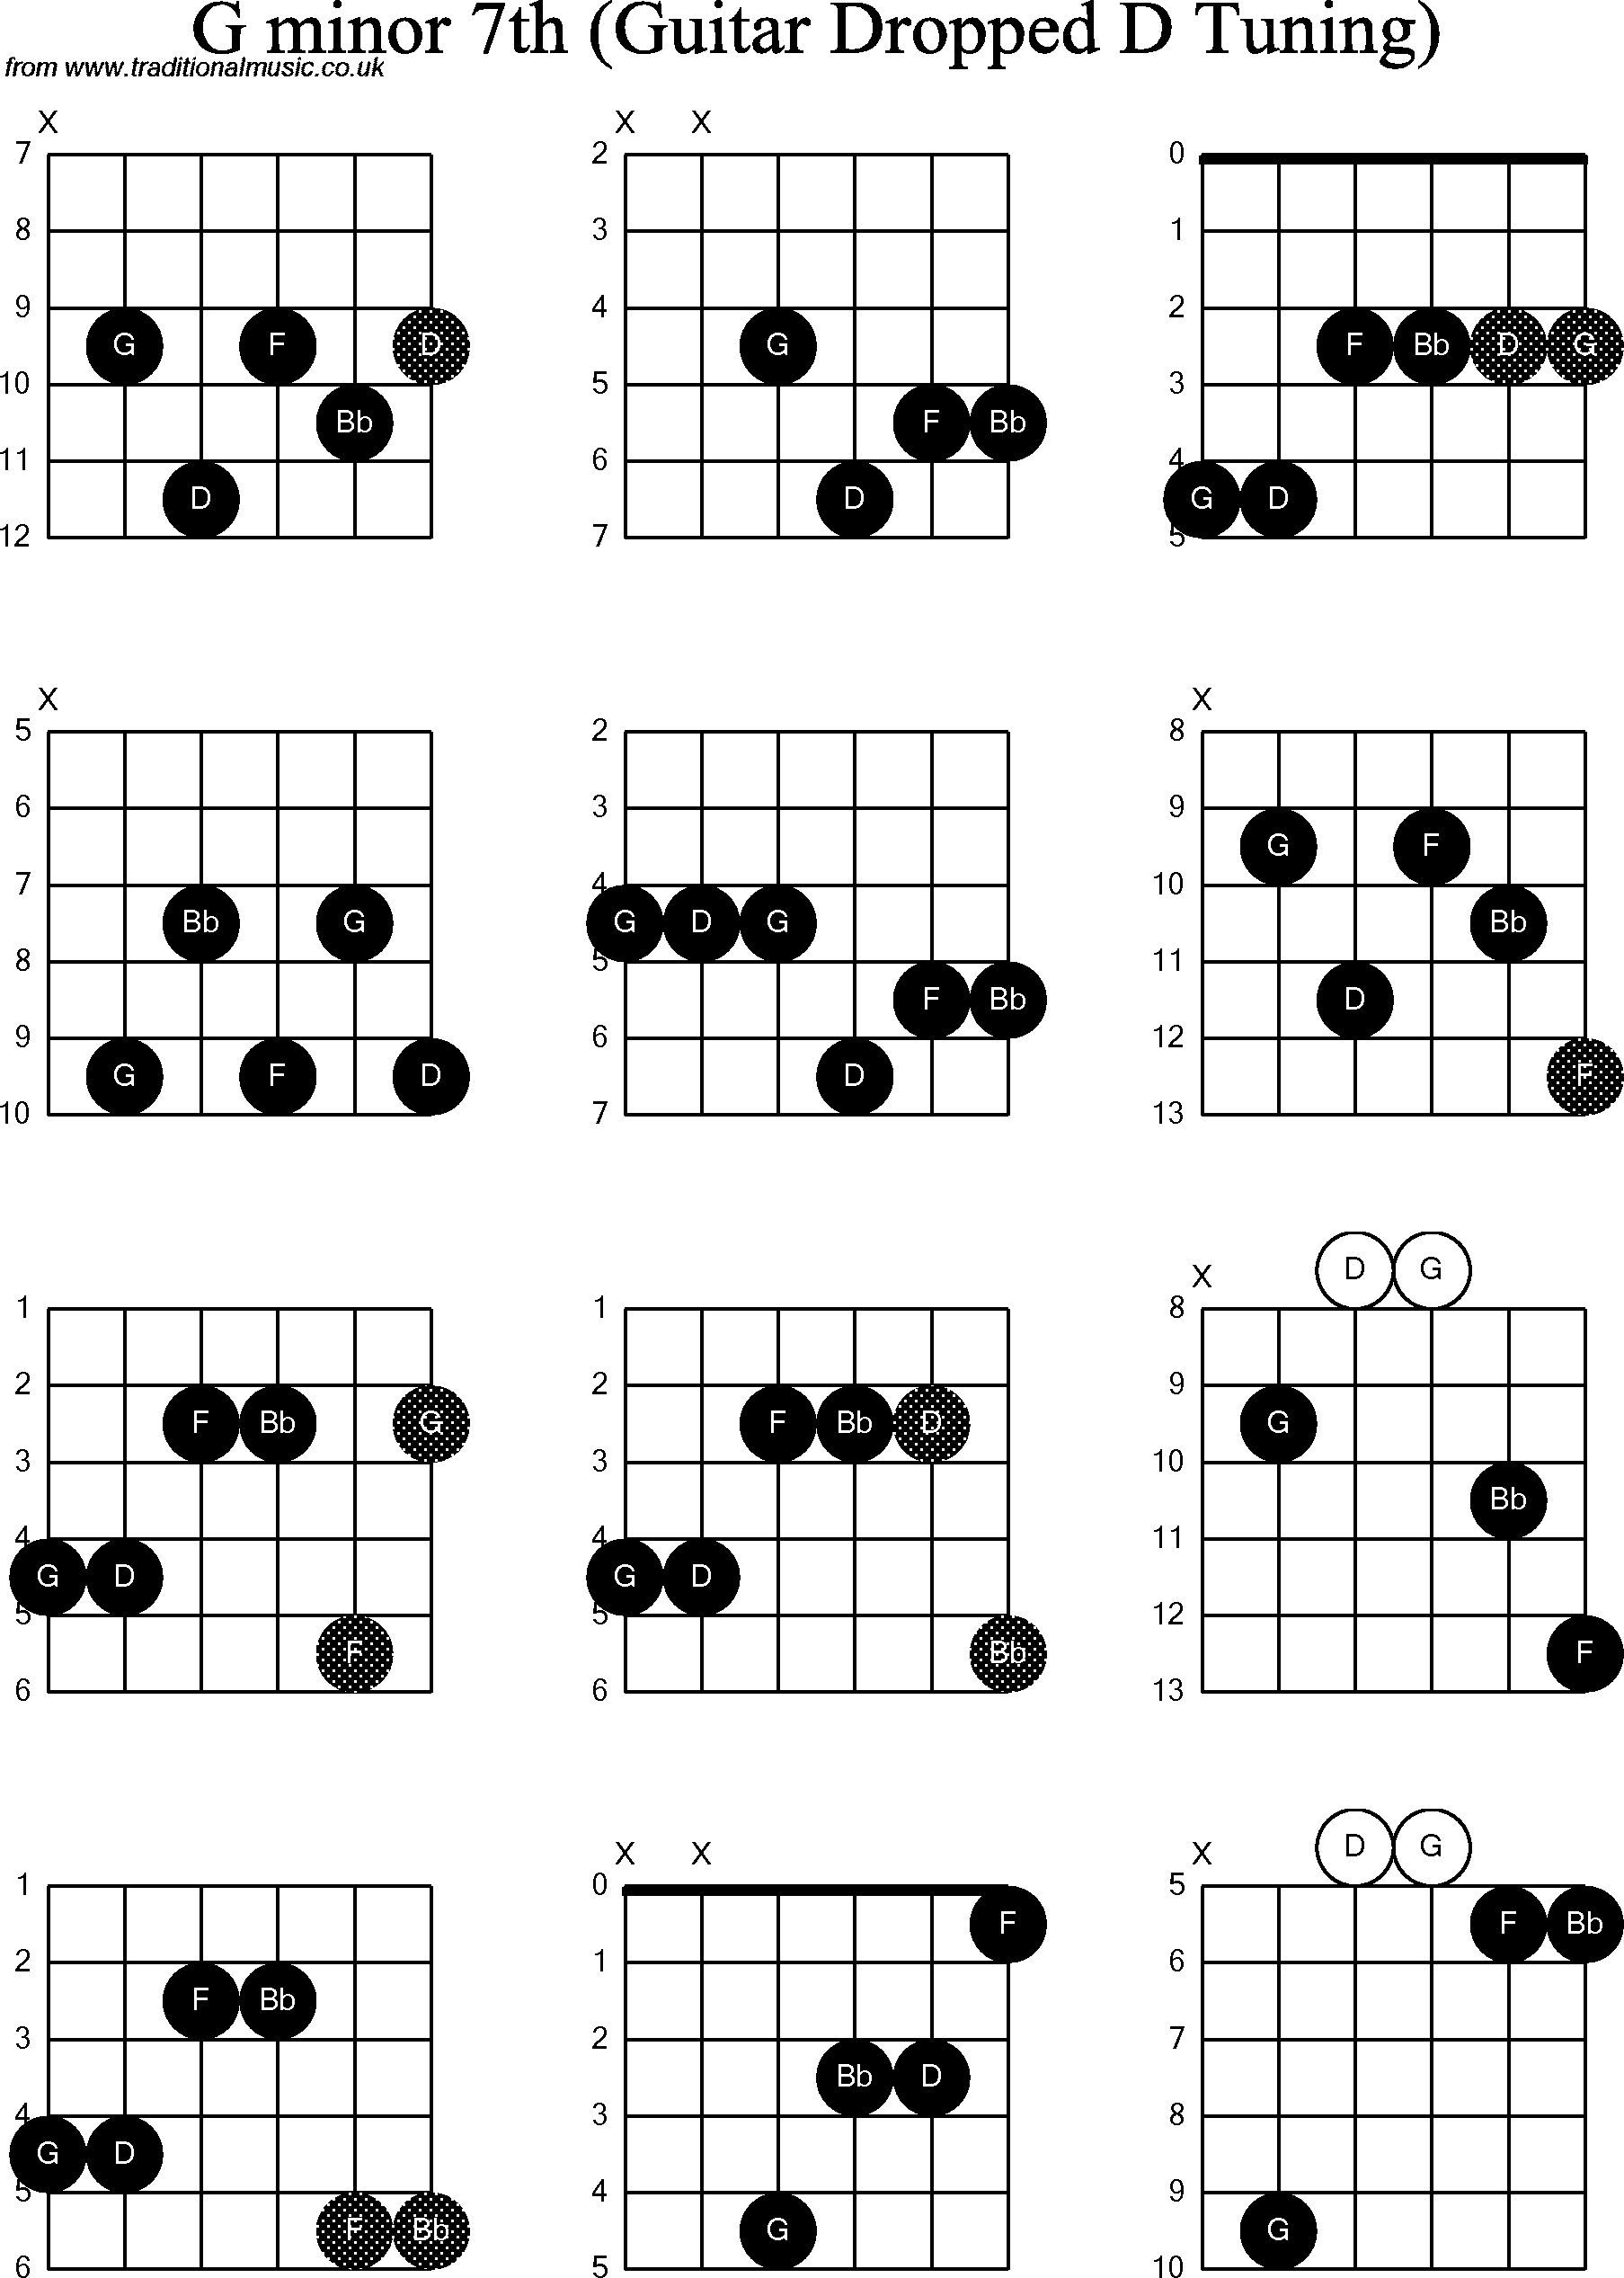 Chord Diagrams For Dropped D Guitar Dadgbe G Minor7th